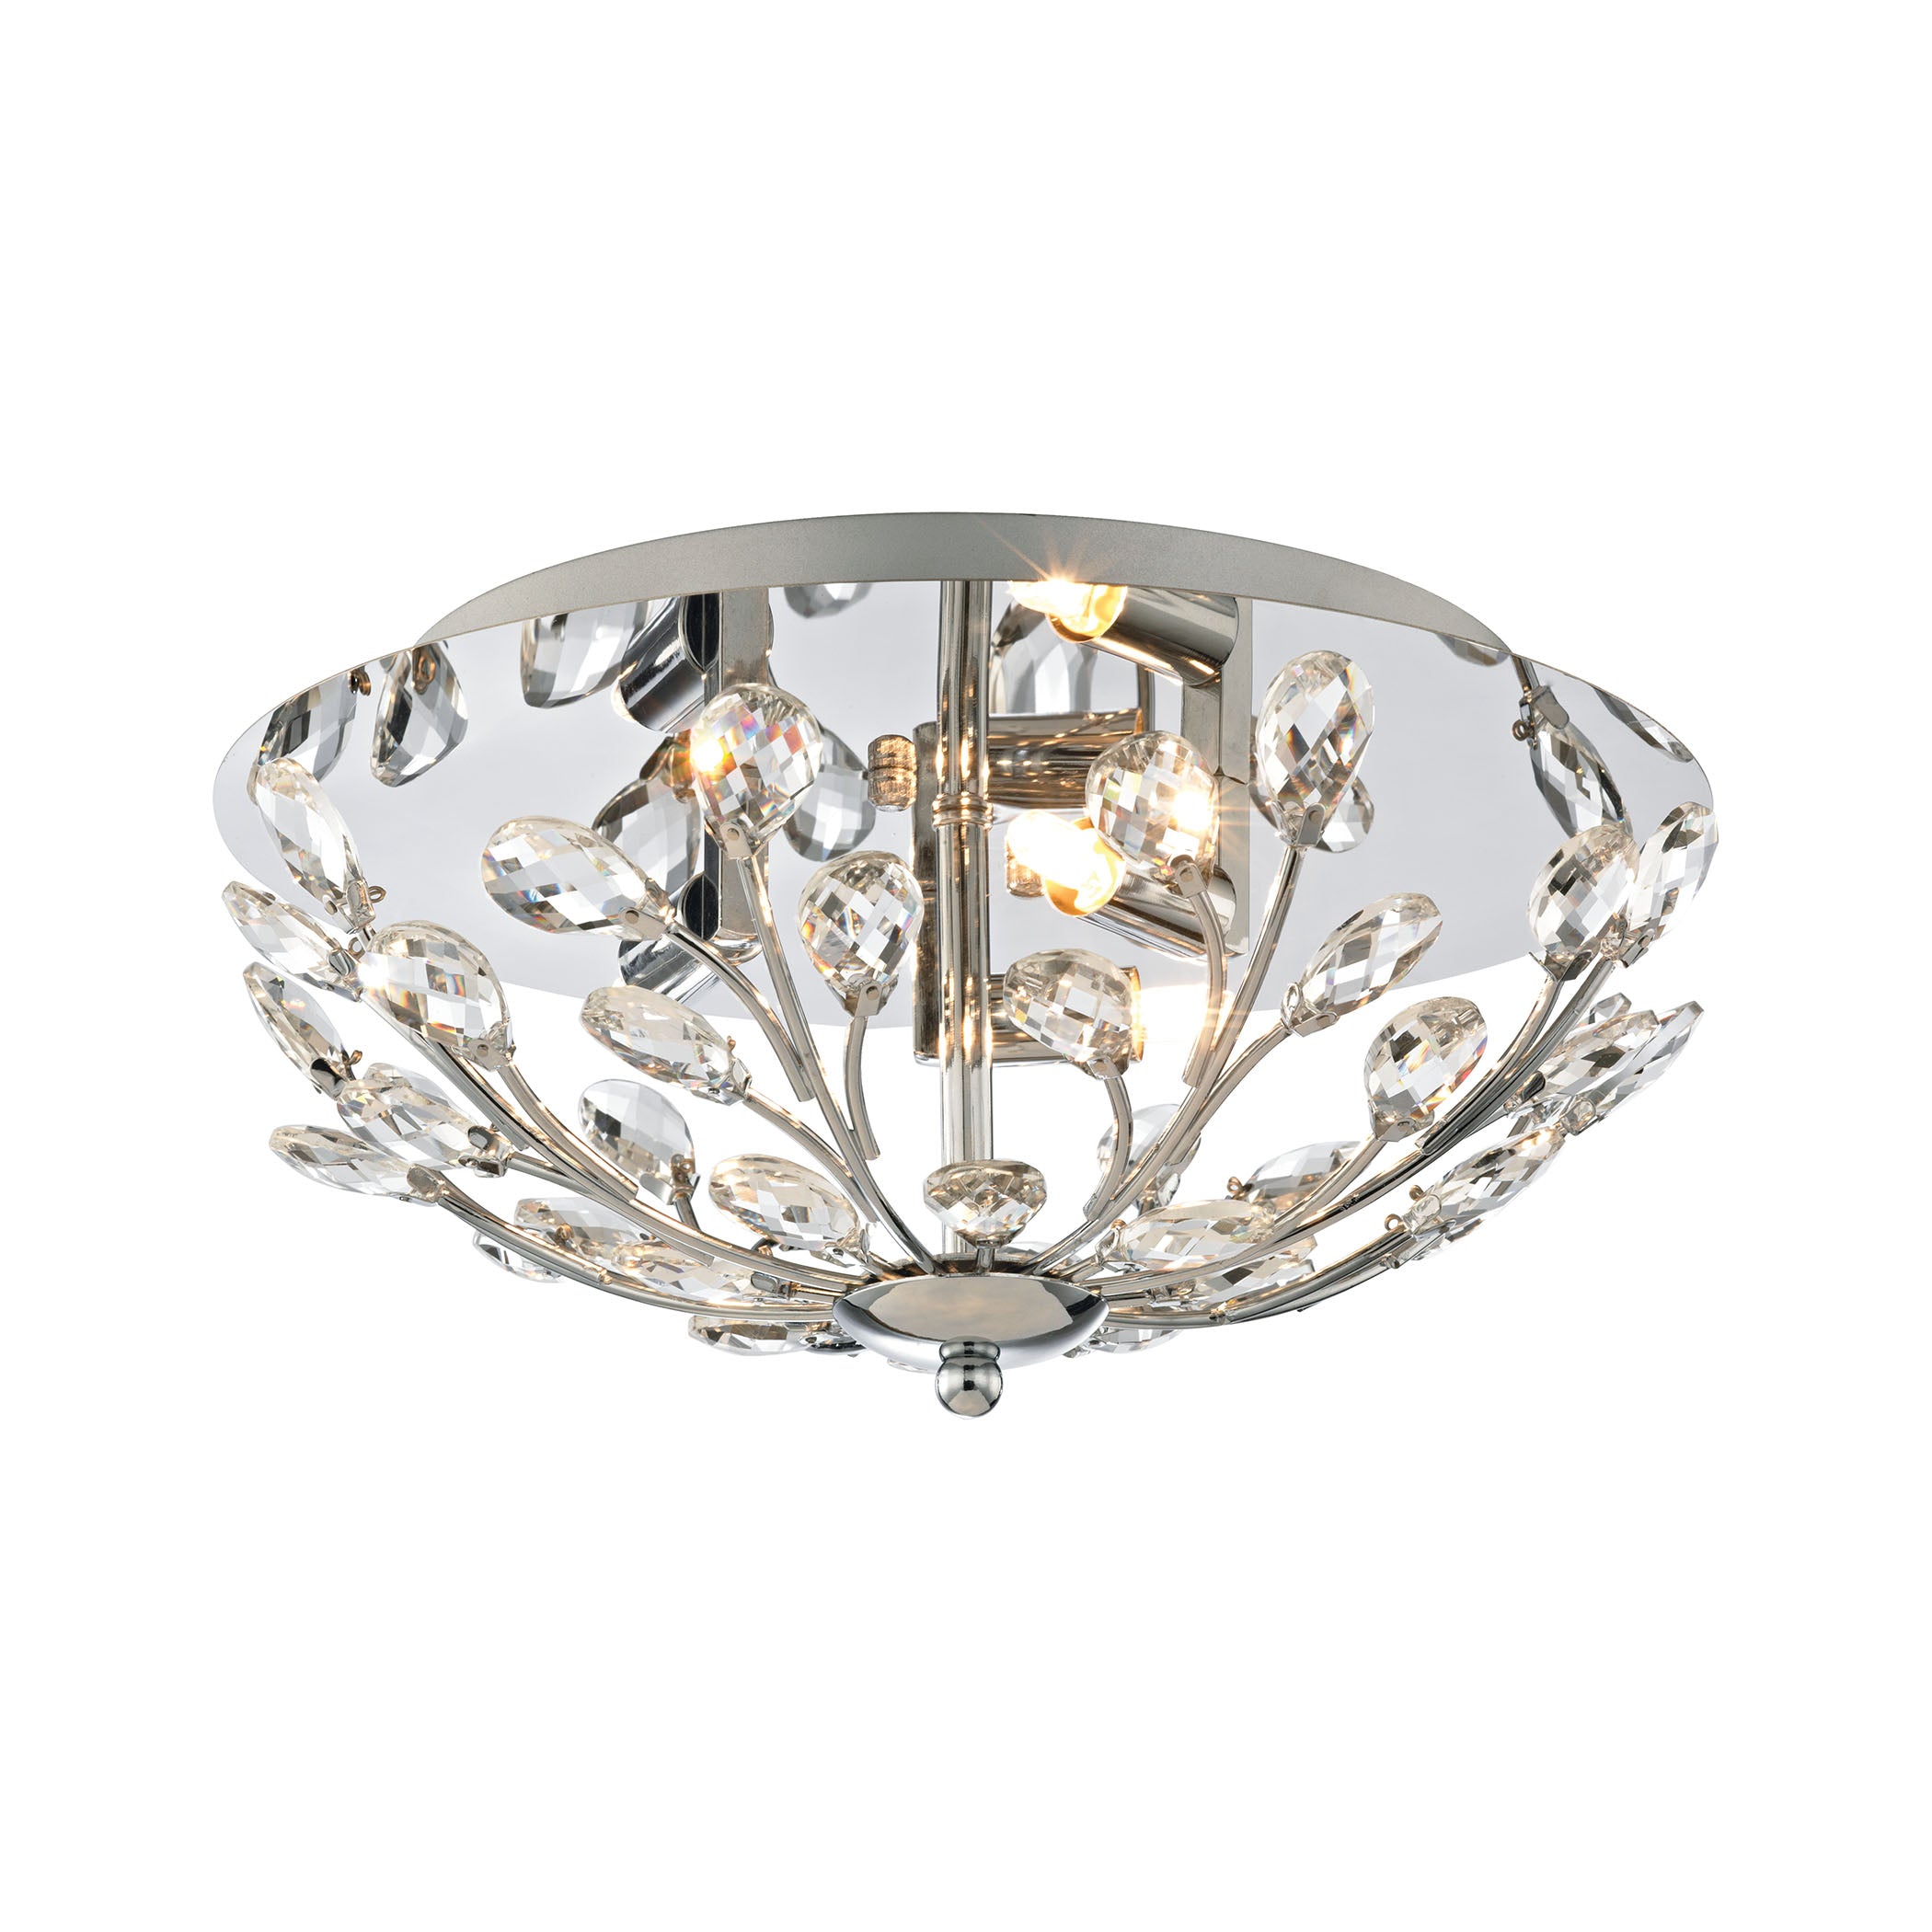 ELK Lighting 45260/3 Crystique 3-Light Flush Mount in Polished Chrome with Branch Metalwork and Clear Crystal